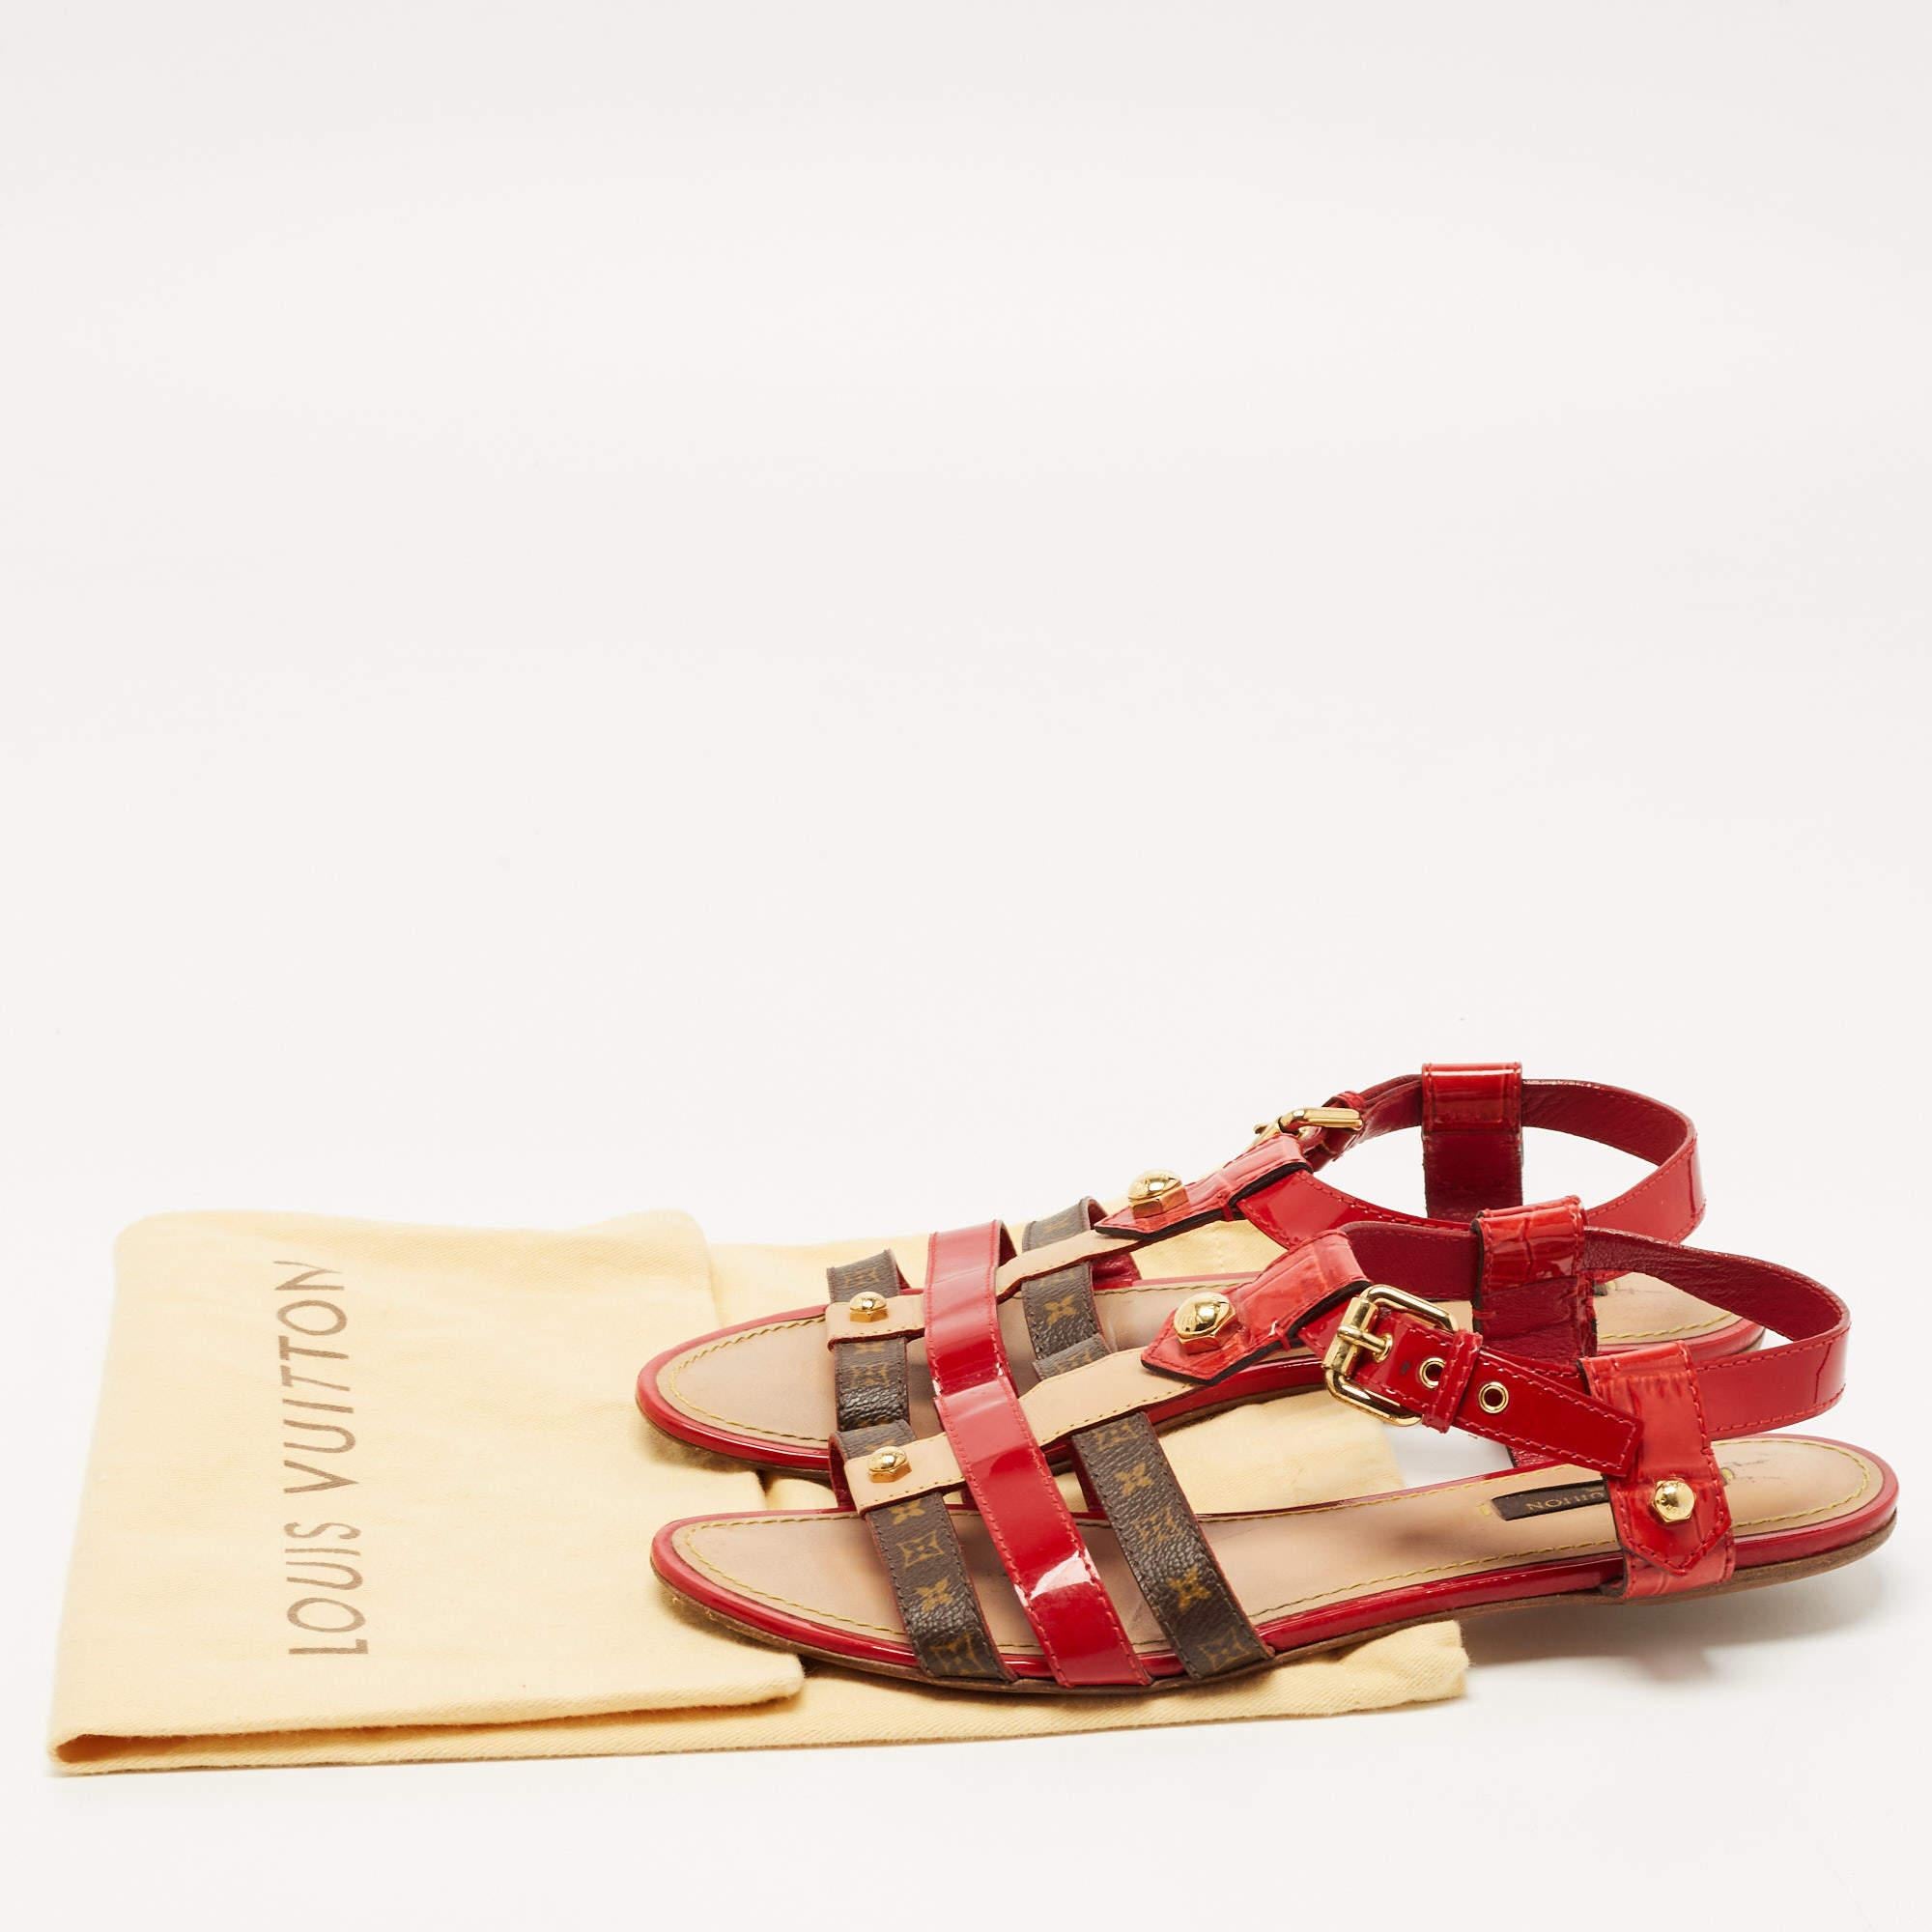 Louis Vuitton Red/Brown Patent Leather and Monogram Canvas Flat Sandals Size 37 5